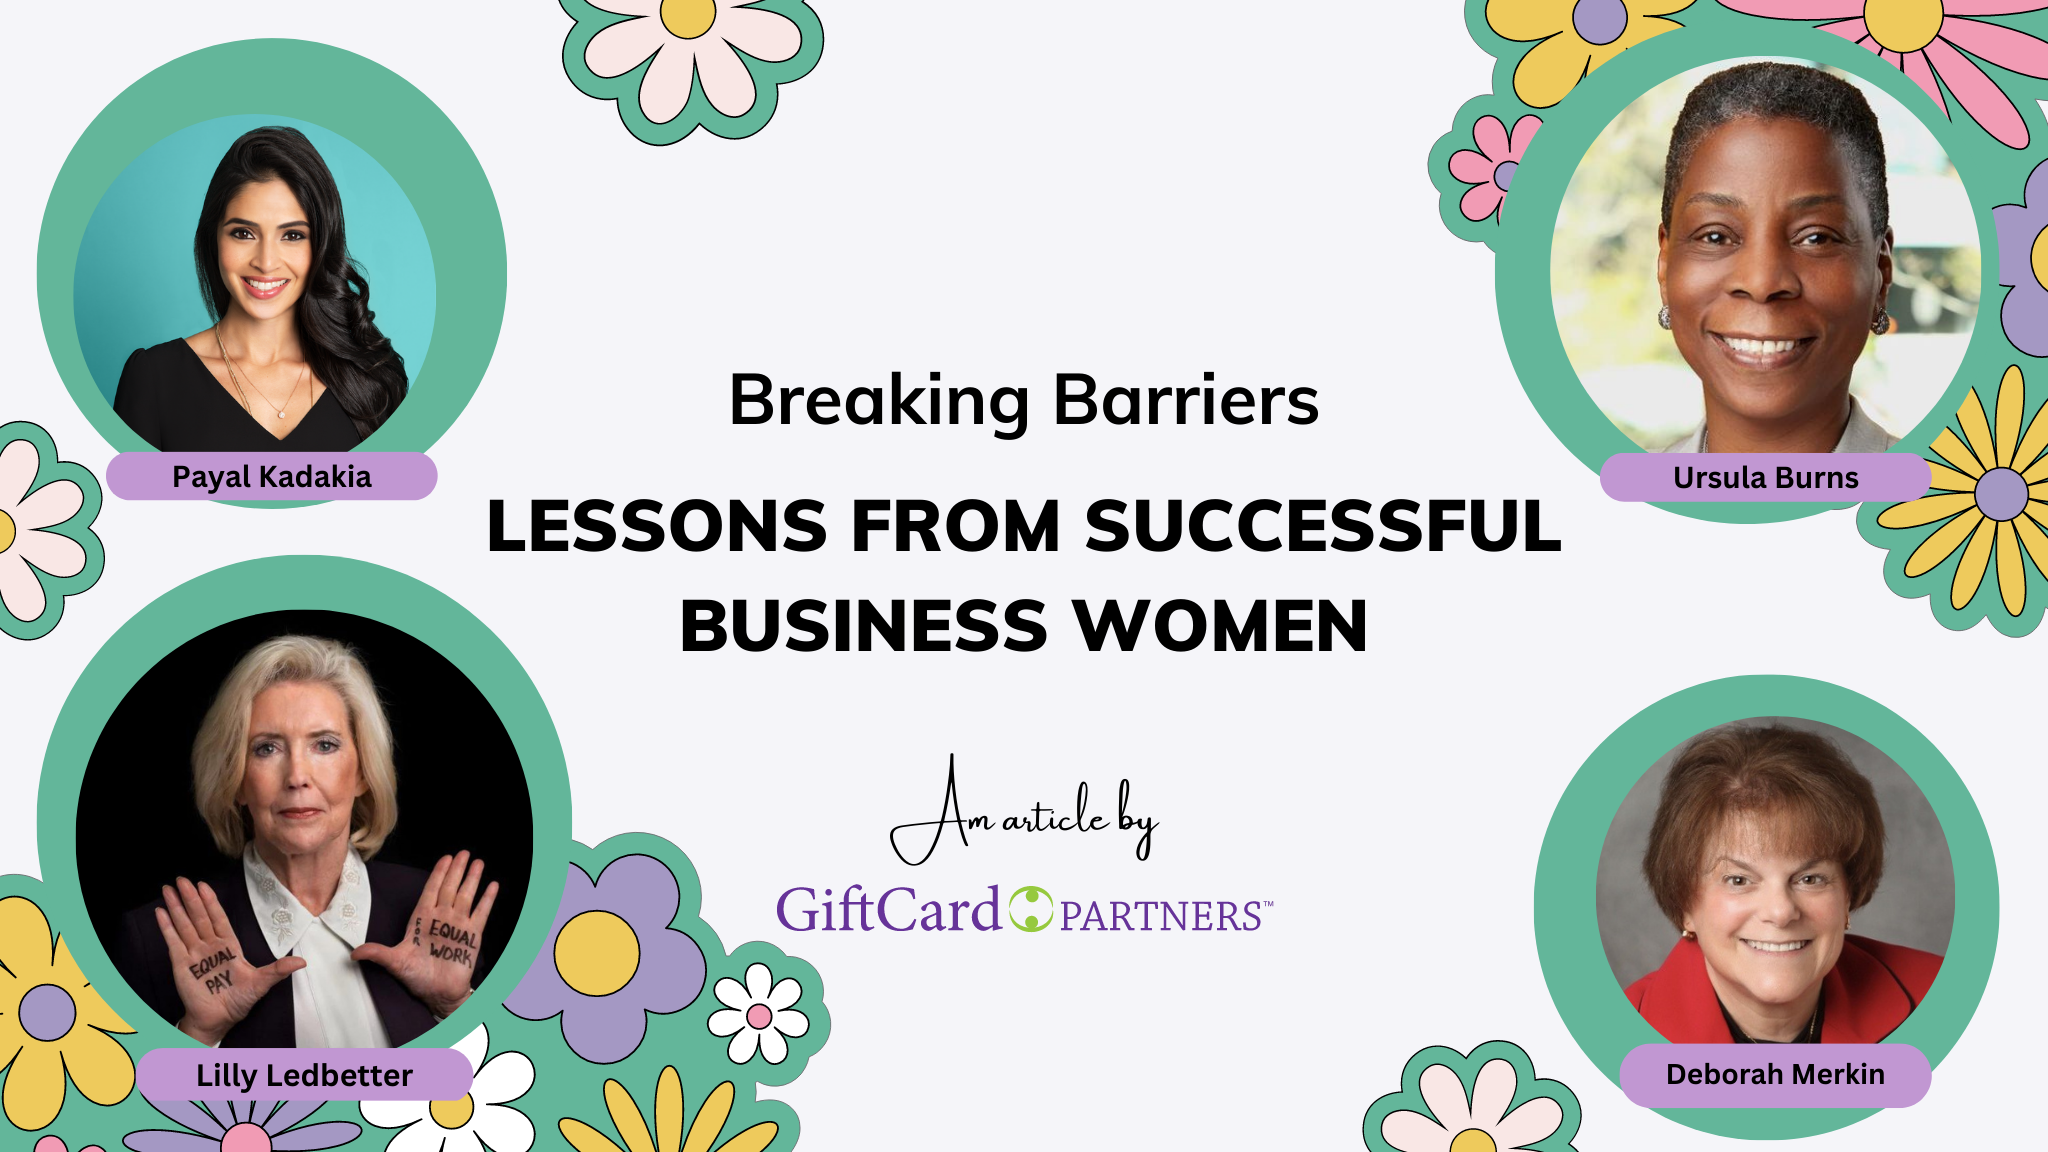 Breaking Barriers: Lessons from Successful Business Women